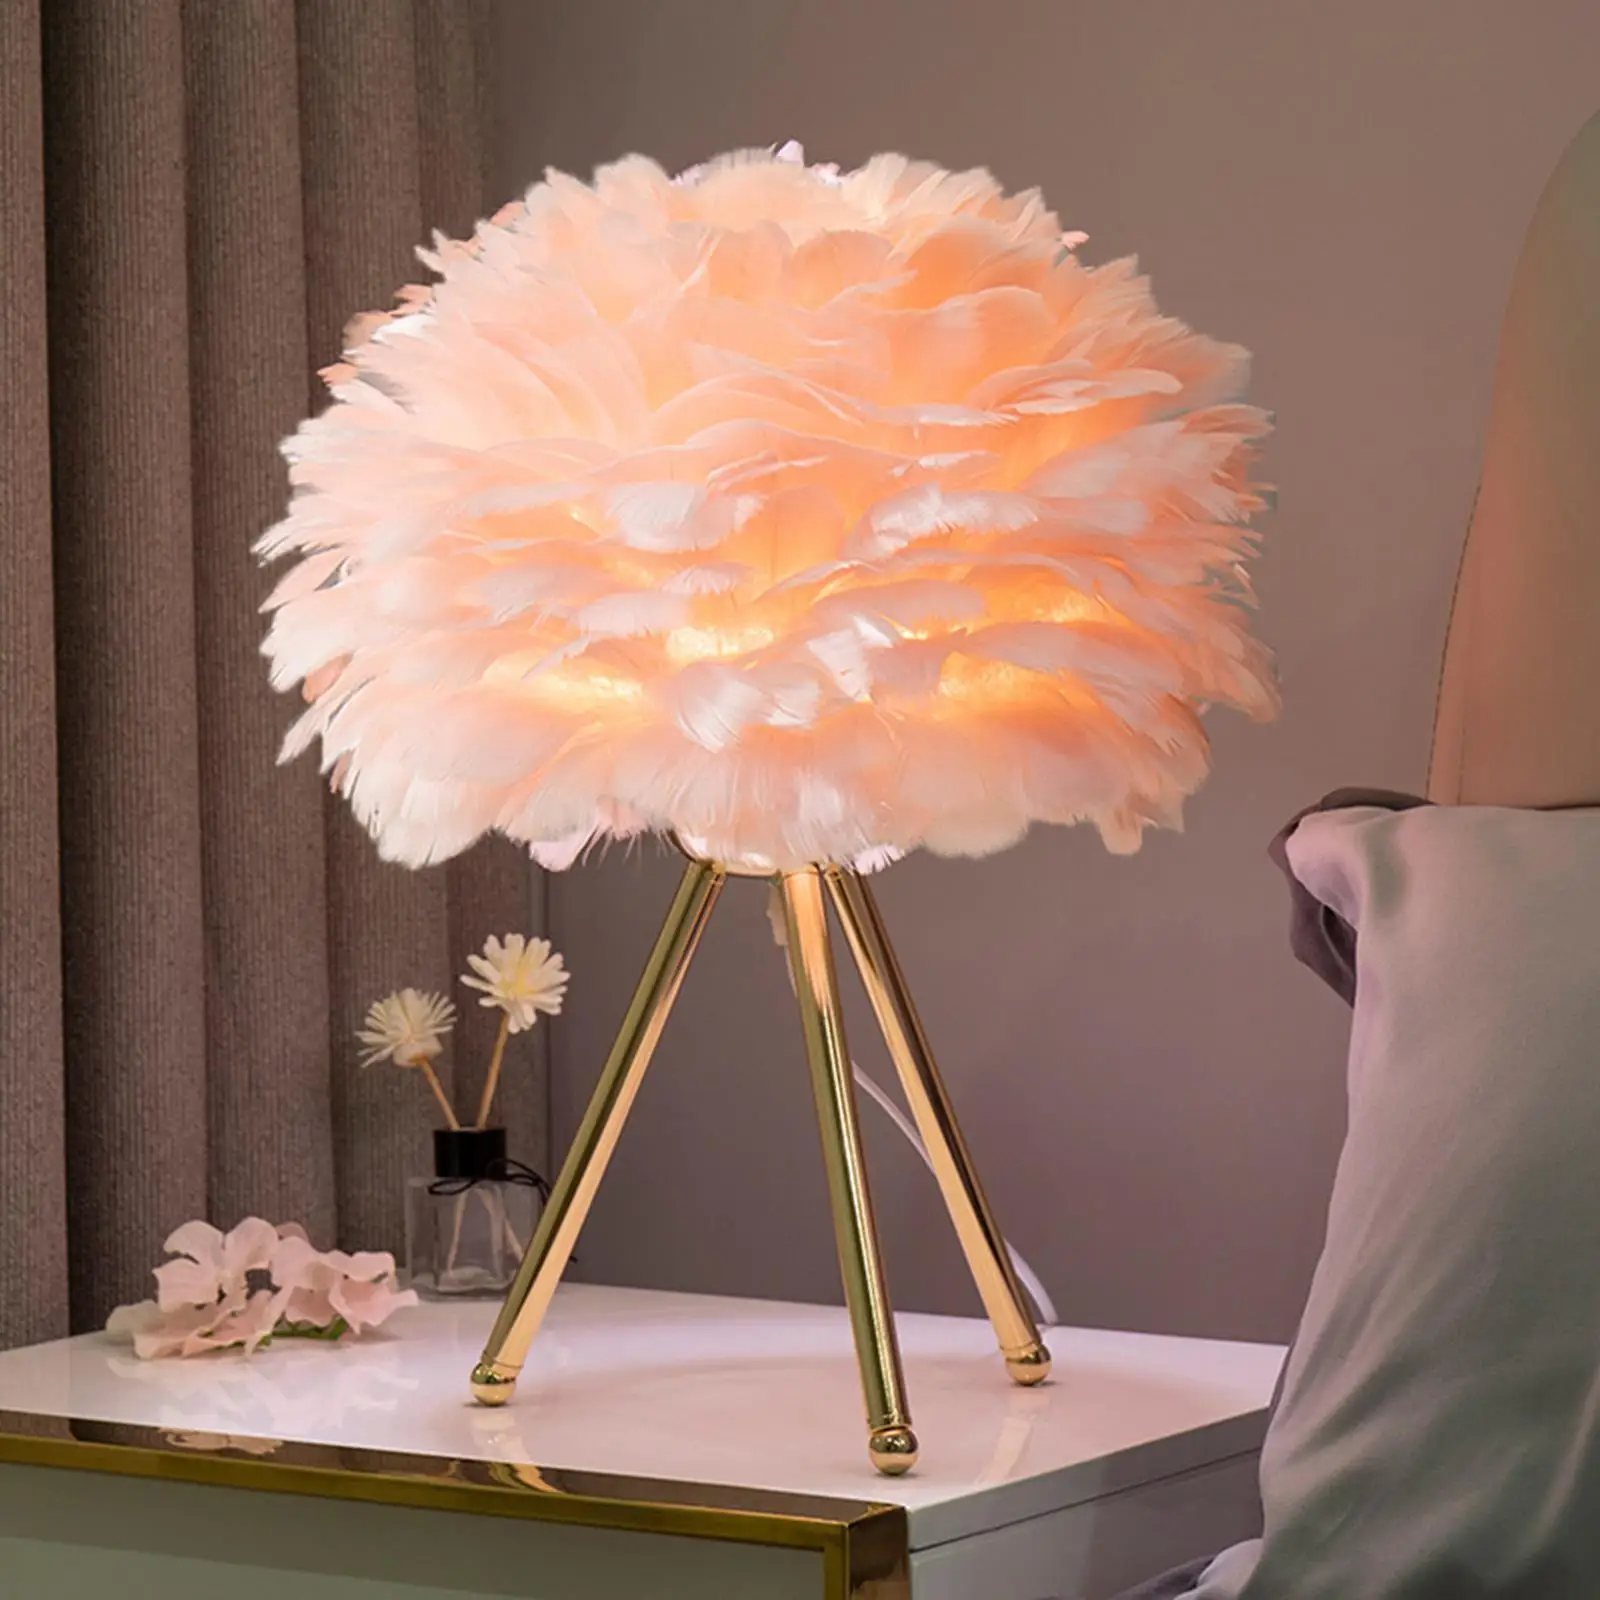 Romantic USB Table Lamp LED Night Light Feather Lampshade Desk Lighting Creative Bedside Lamp for Bedroom Office Home Decoration